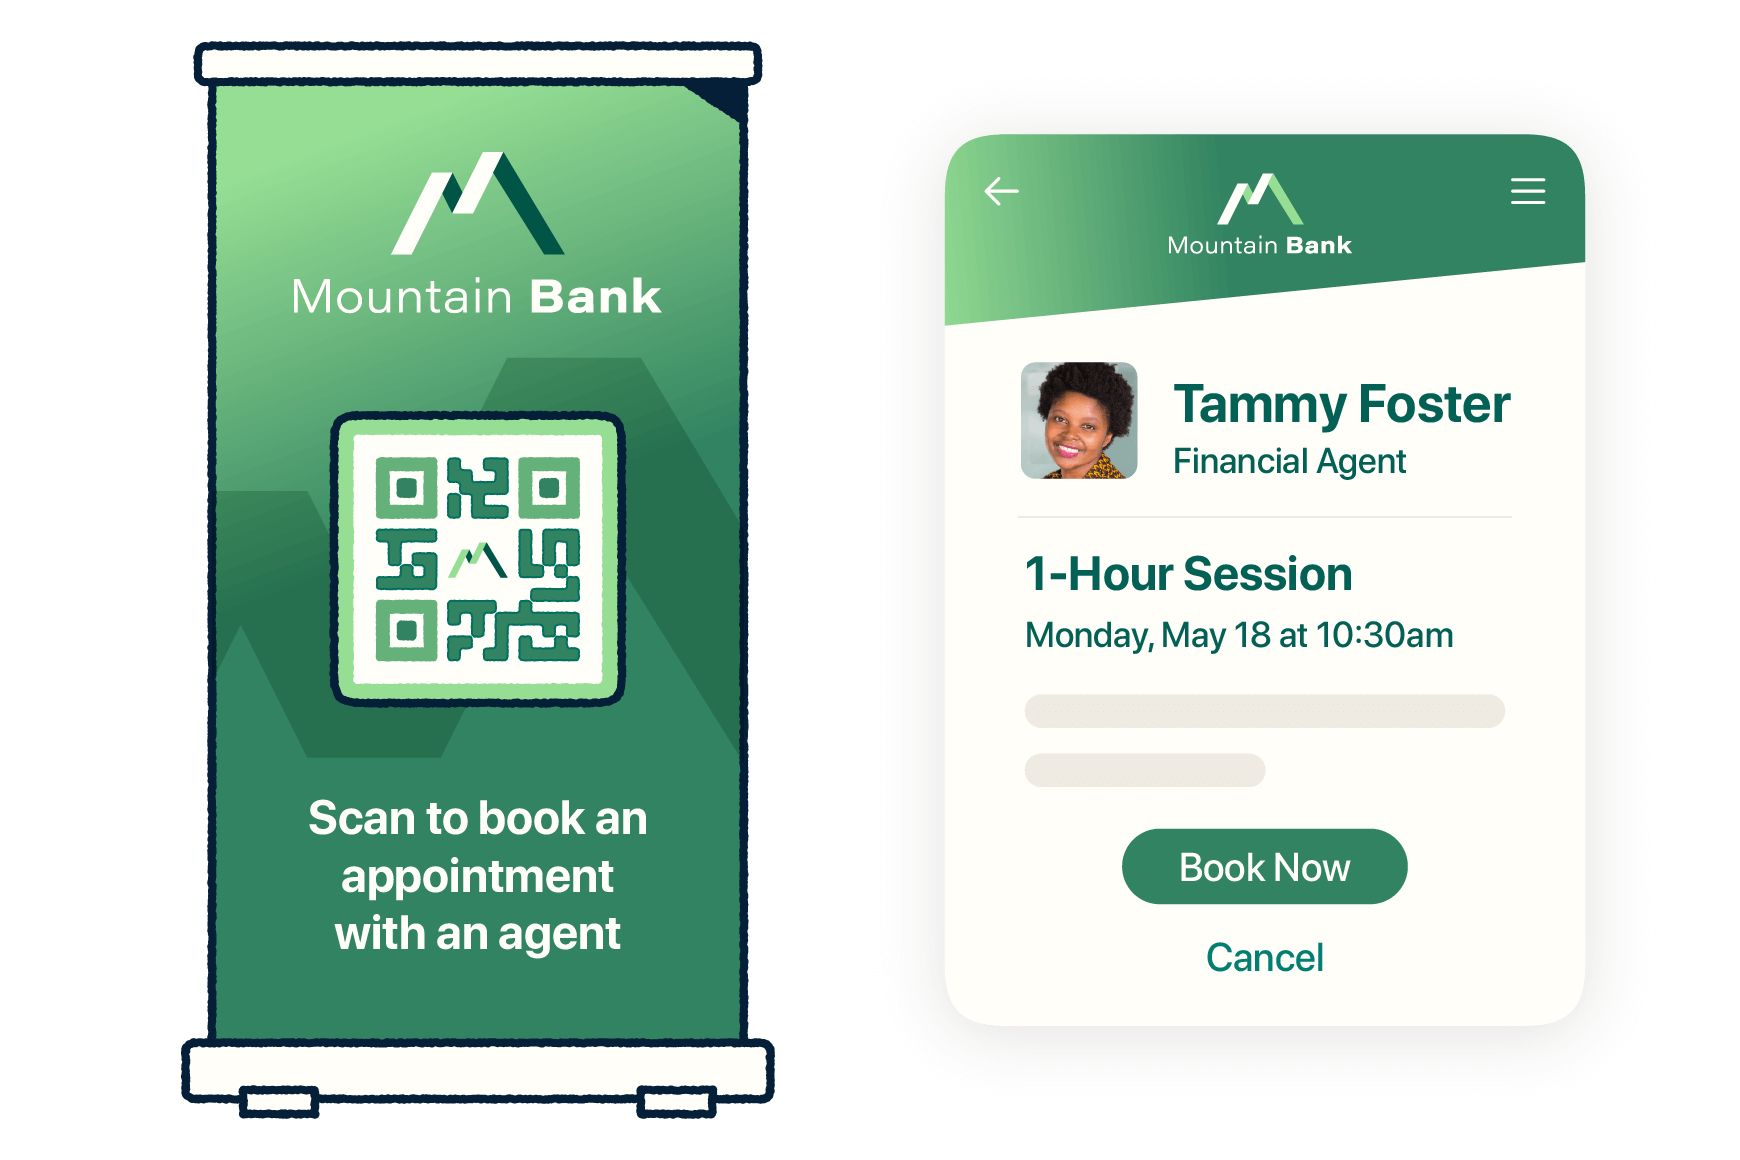 QR code to book an appointment with a financial agent